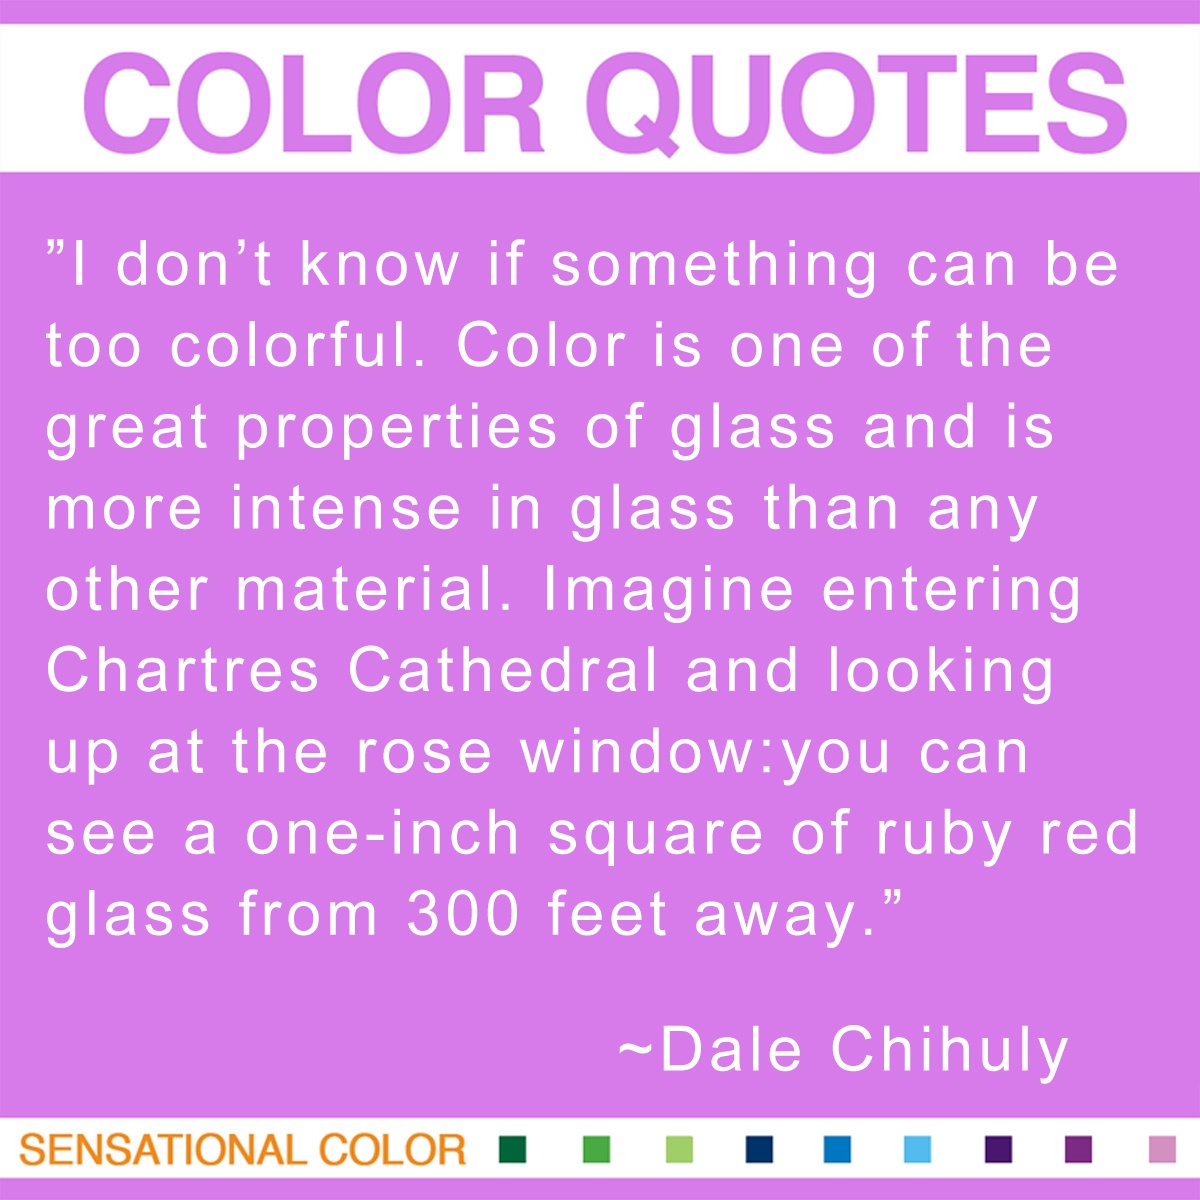 “I don’t know if something can be too colorful. Color is one of the great properties of glass and is more intense in glass than any other material. Imagine entering Chartres Cathedral and looking up at the rose window: you can see a one-inch square of ruby red glass from 300 feet away.” - Dale Chihuly